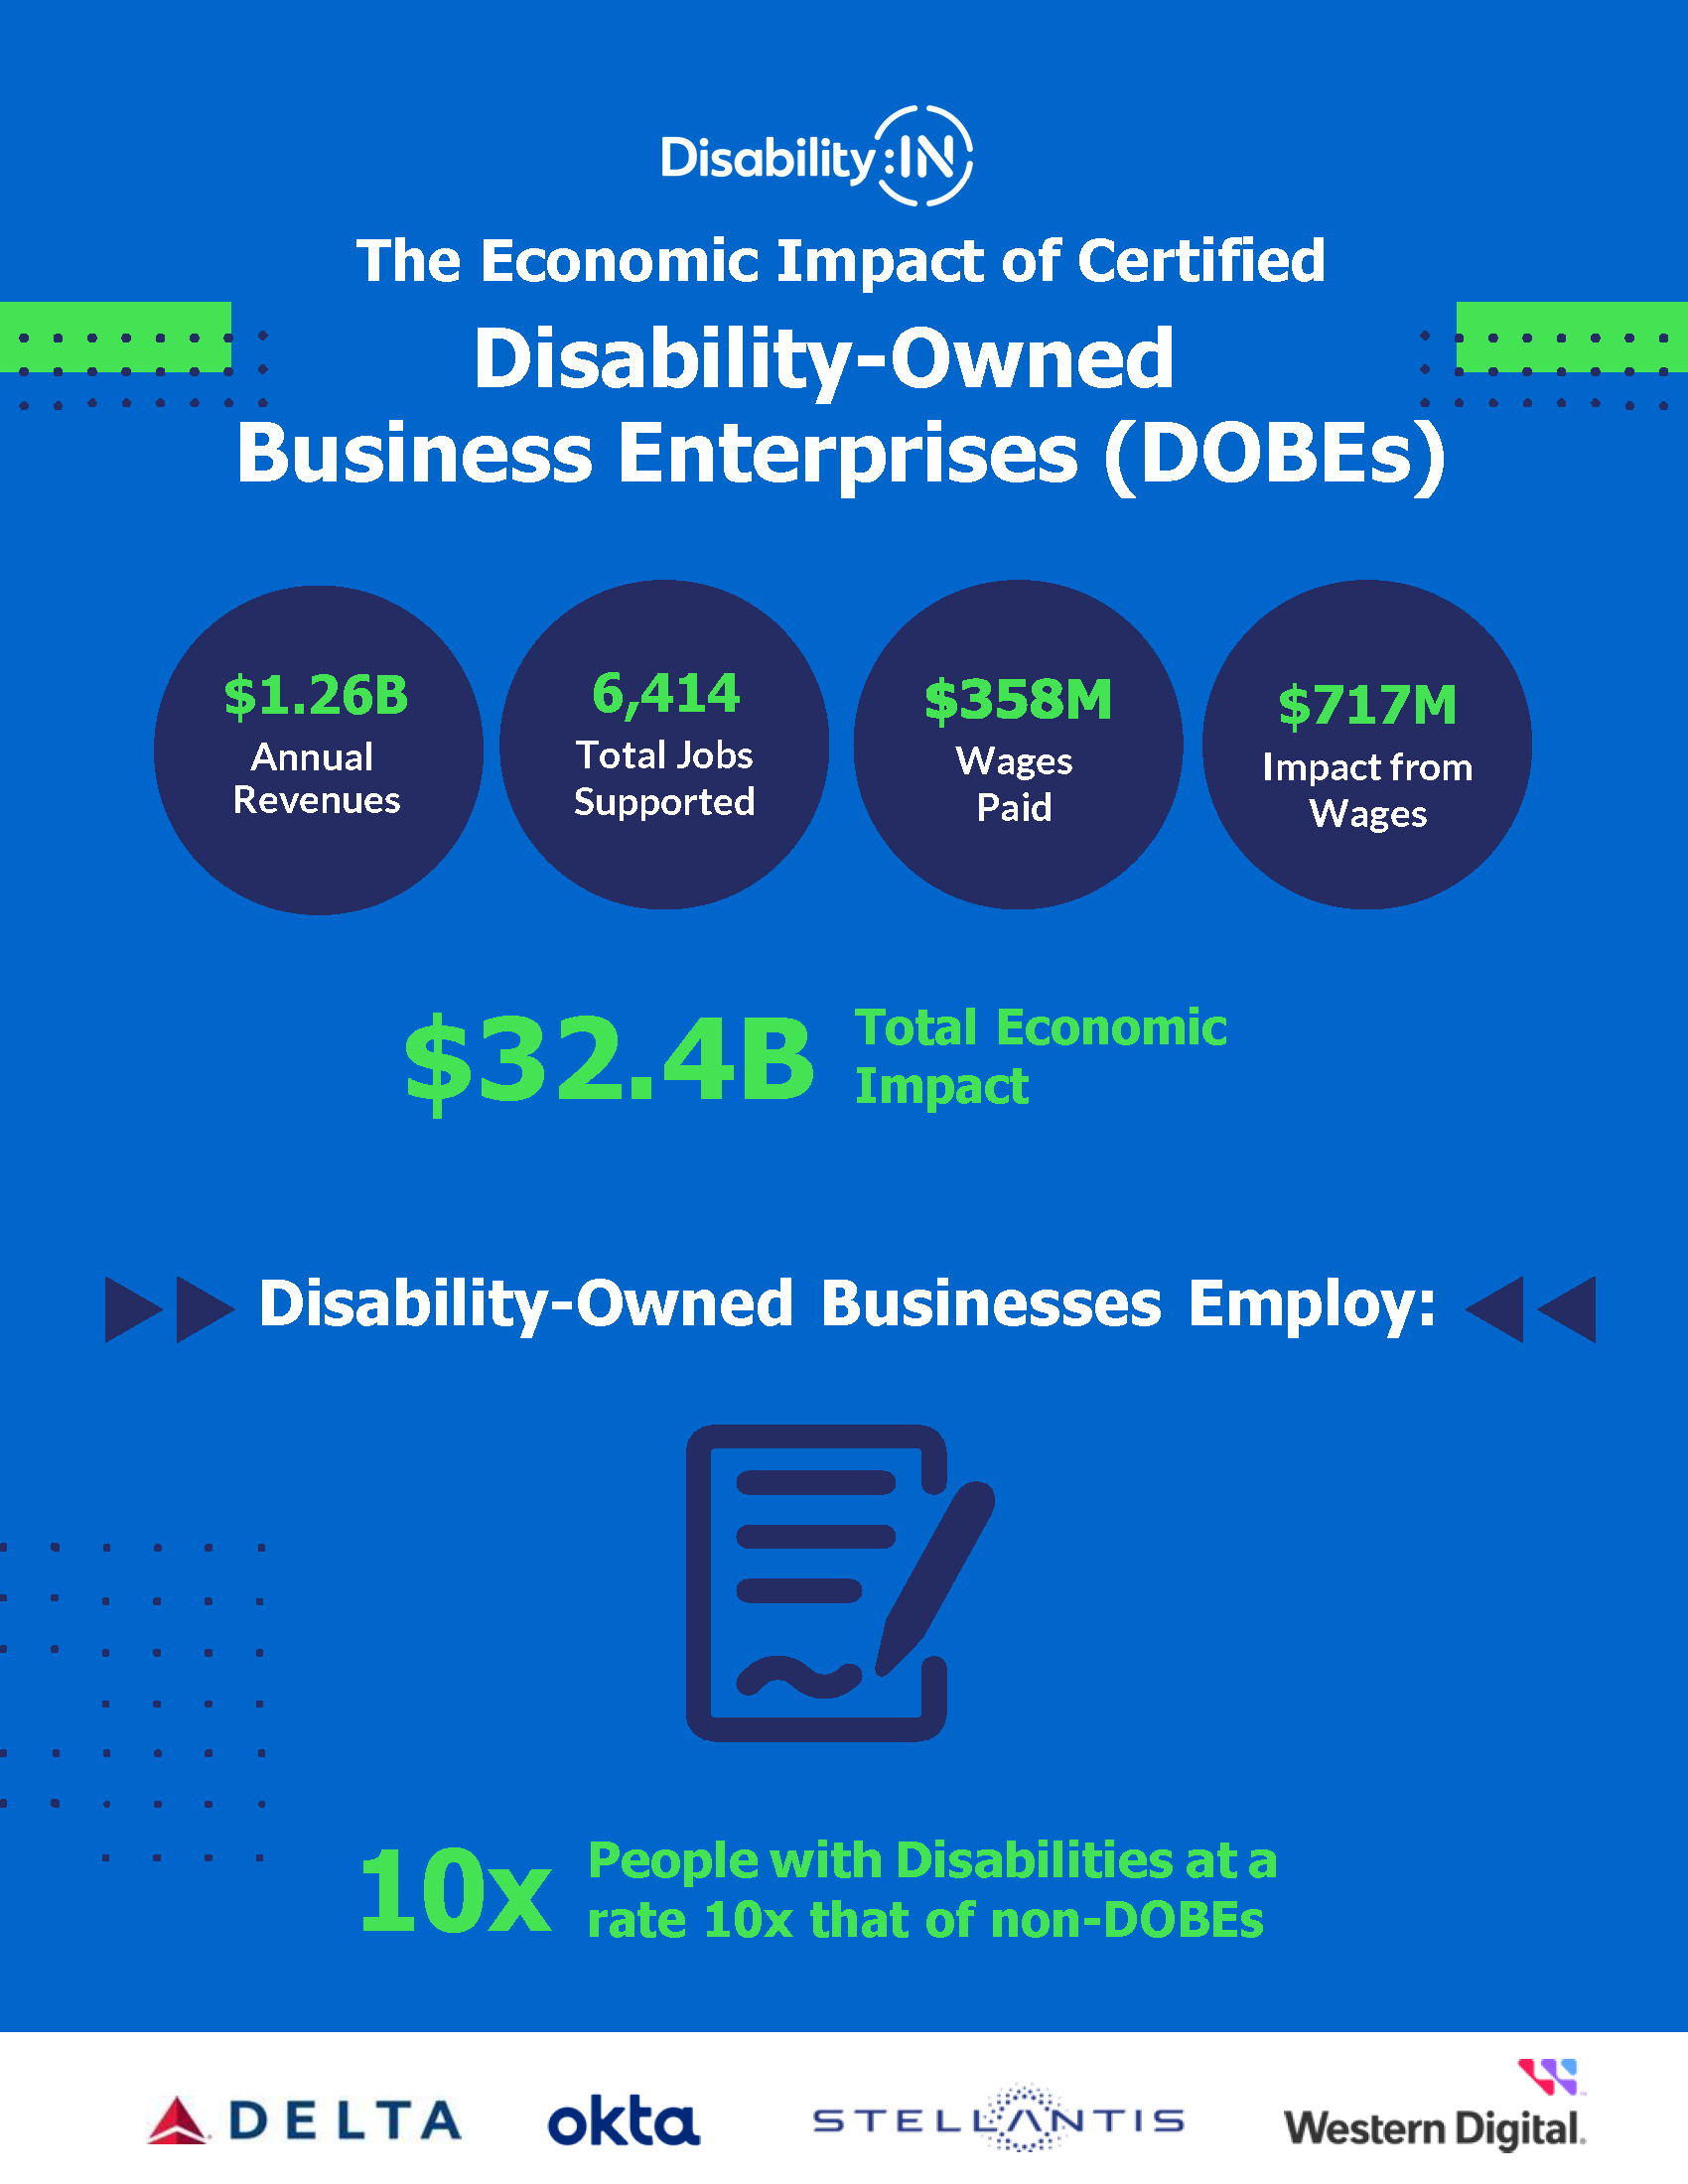 Accessible PDF of The Economic Impact of Certified Disability-Owned Business Enterprises (DOBEs) report found in download button.